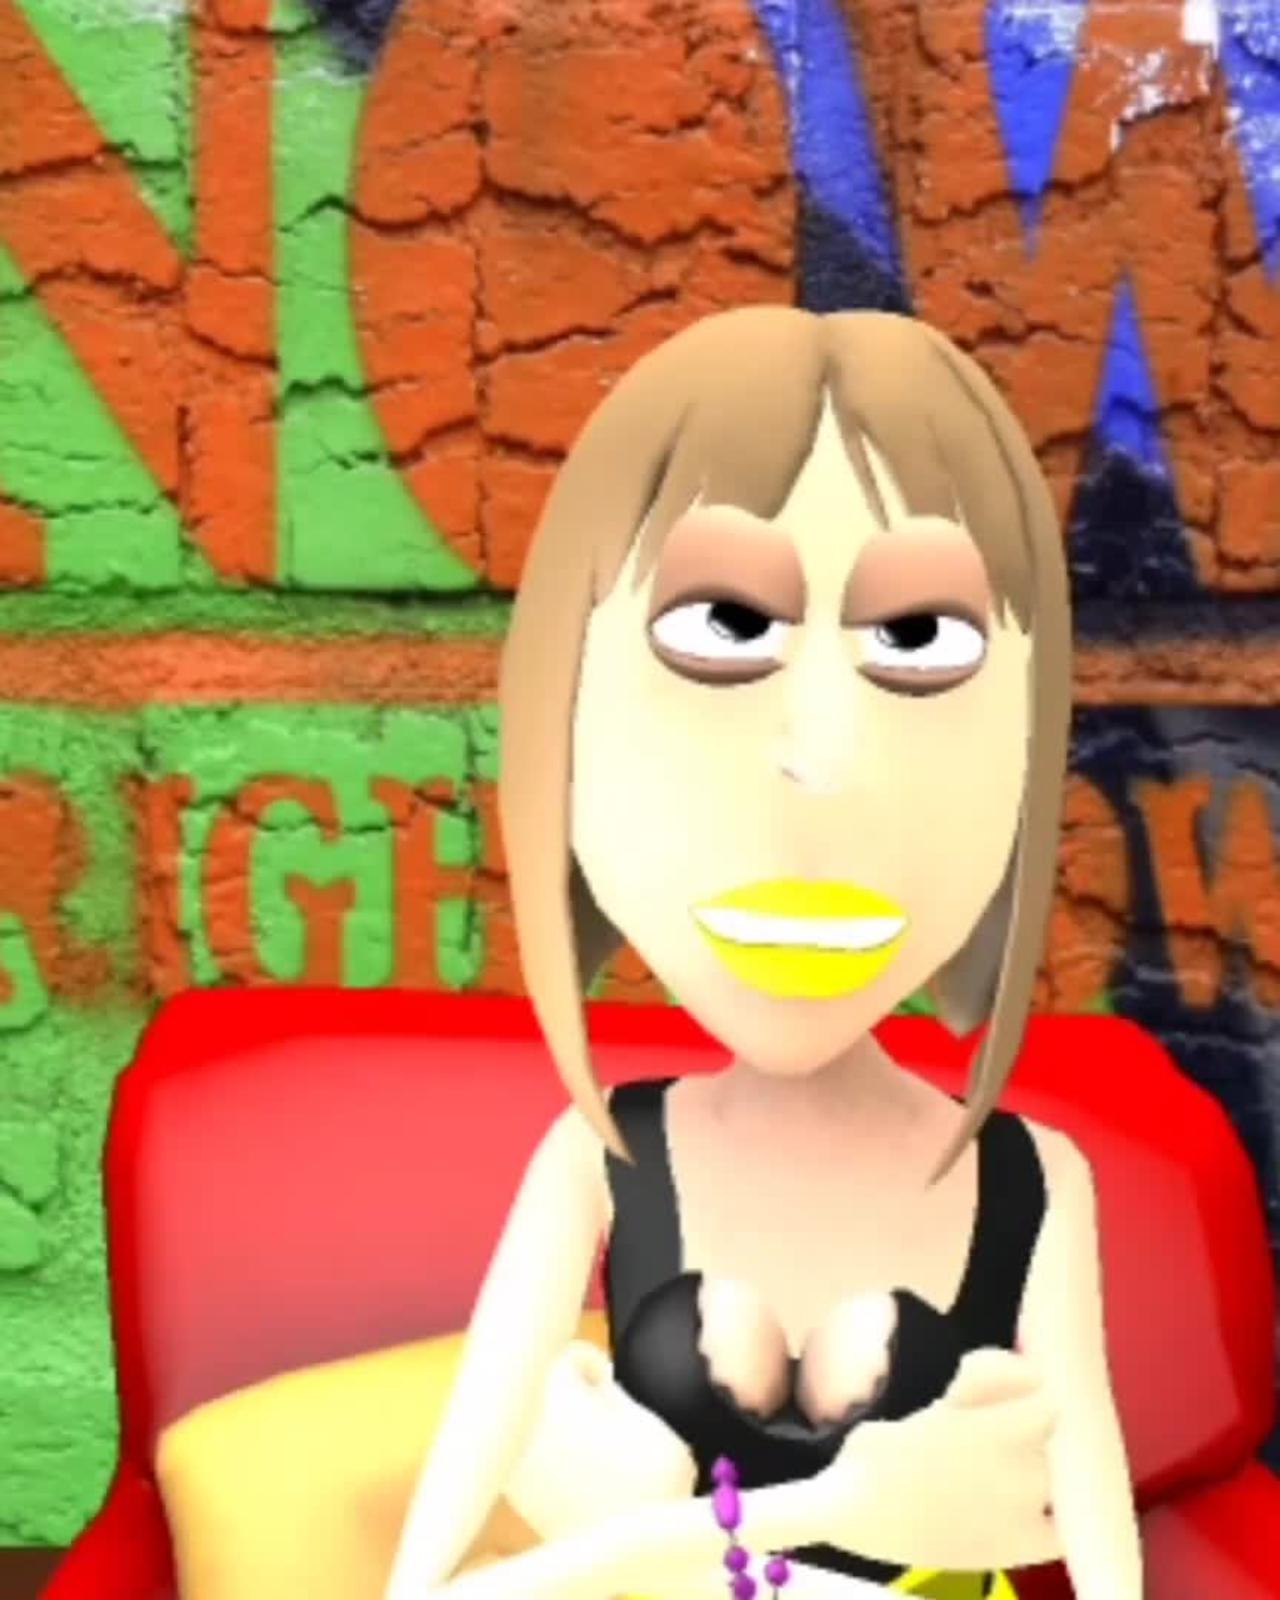 Funny Cartoon Animation About Say Cheese, Taylor Swift & Kanye West 😁